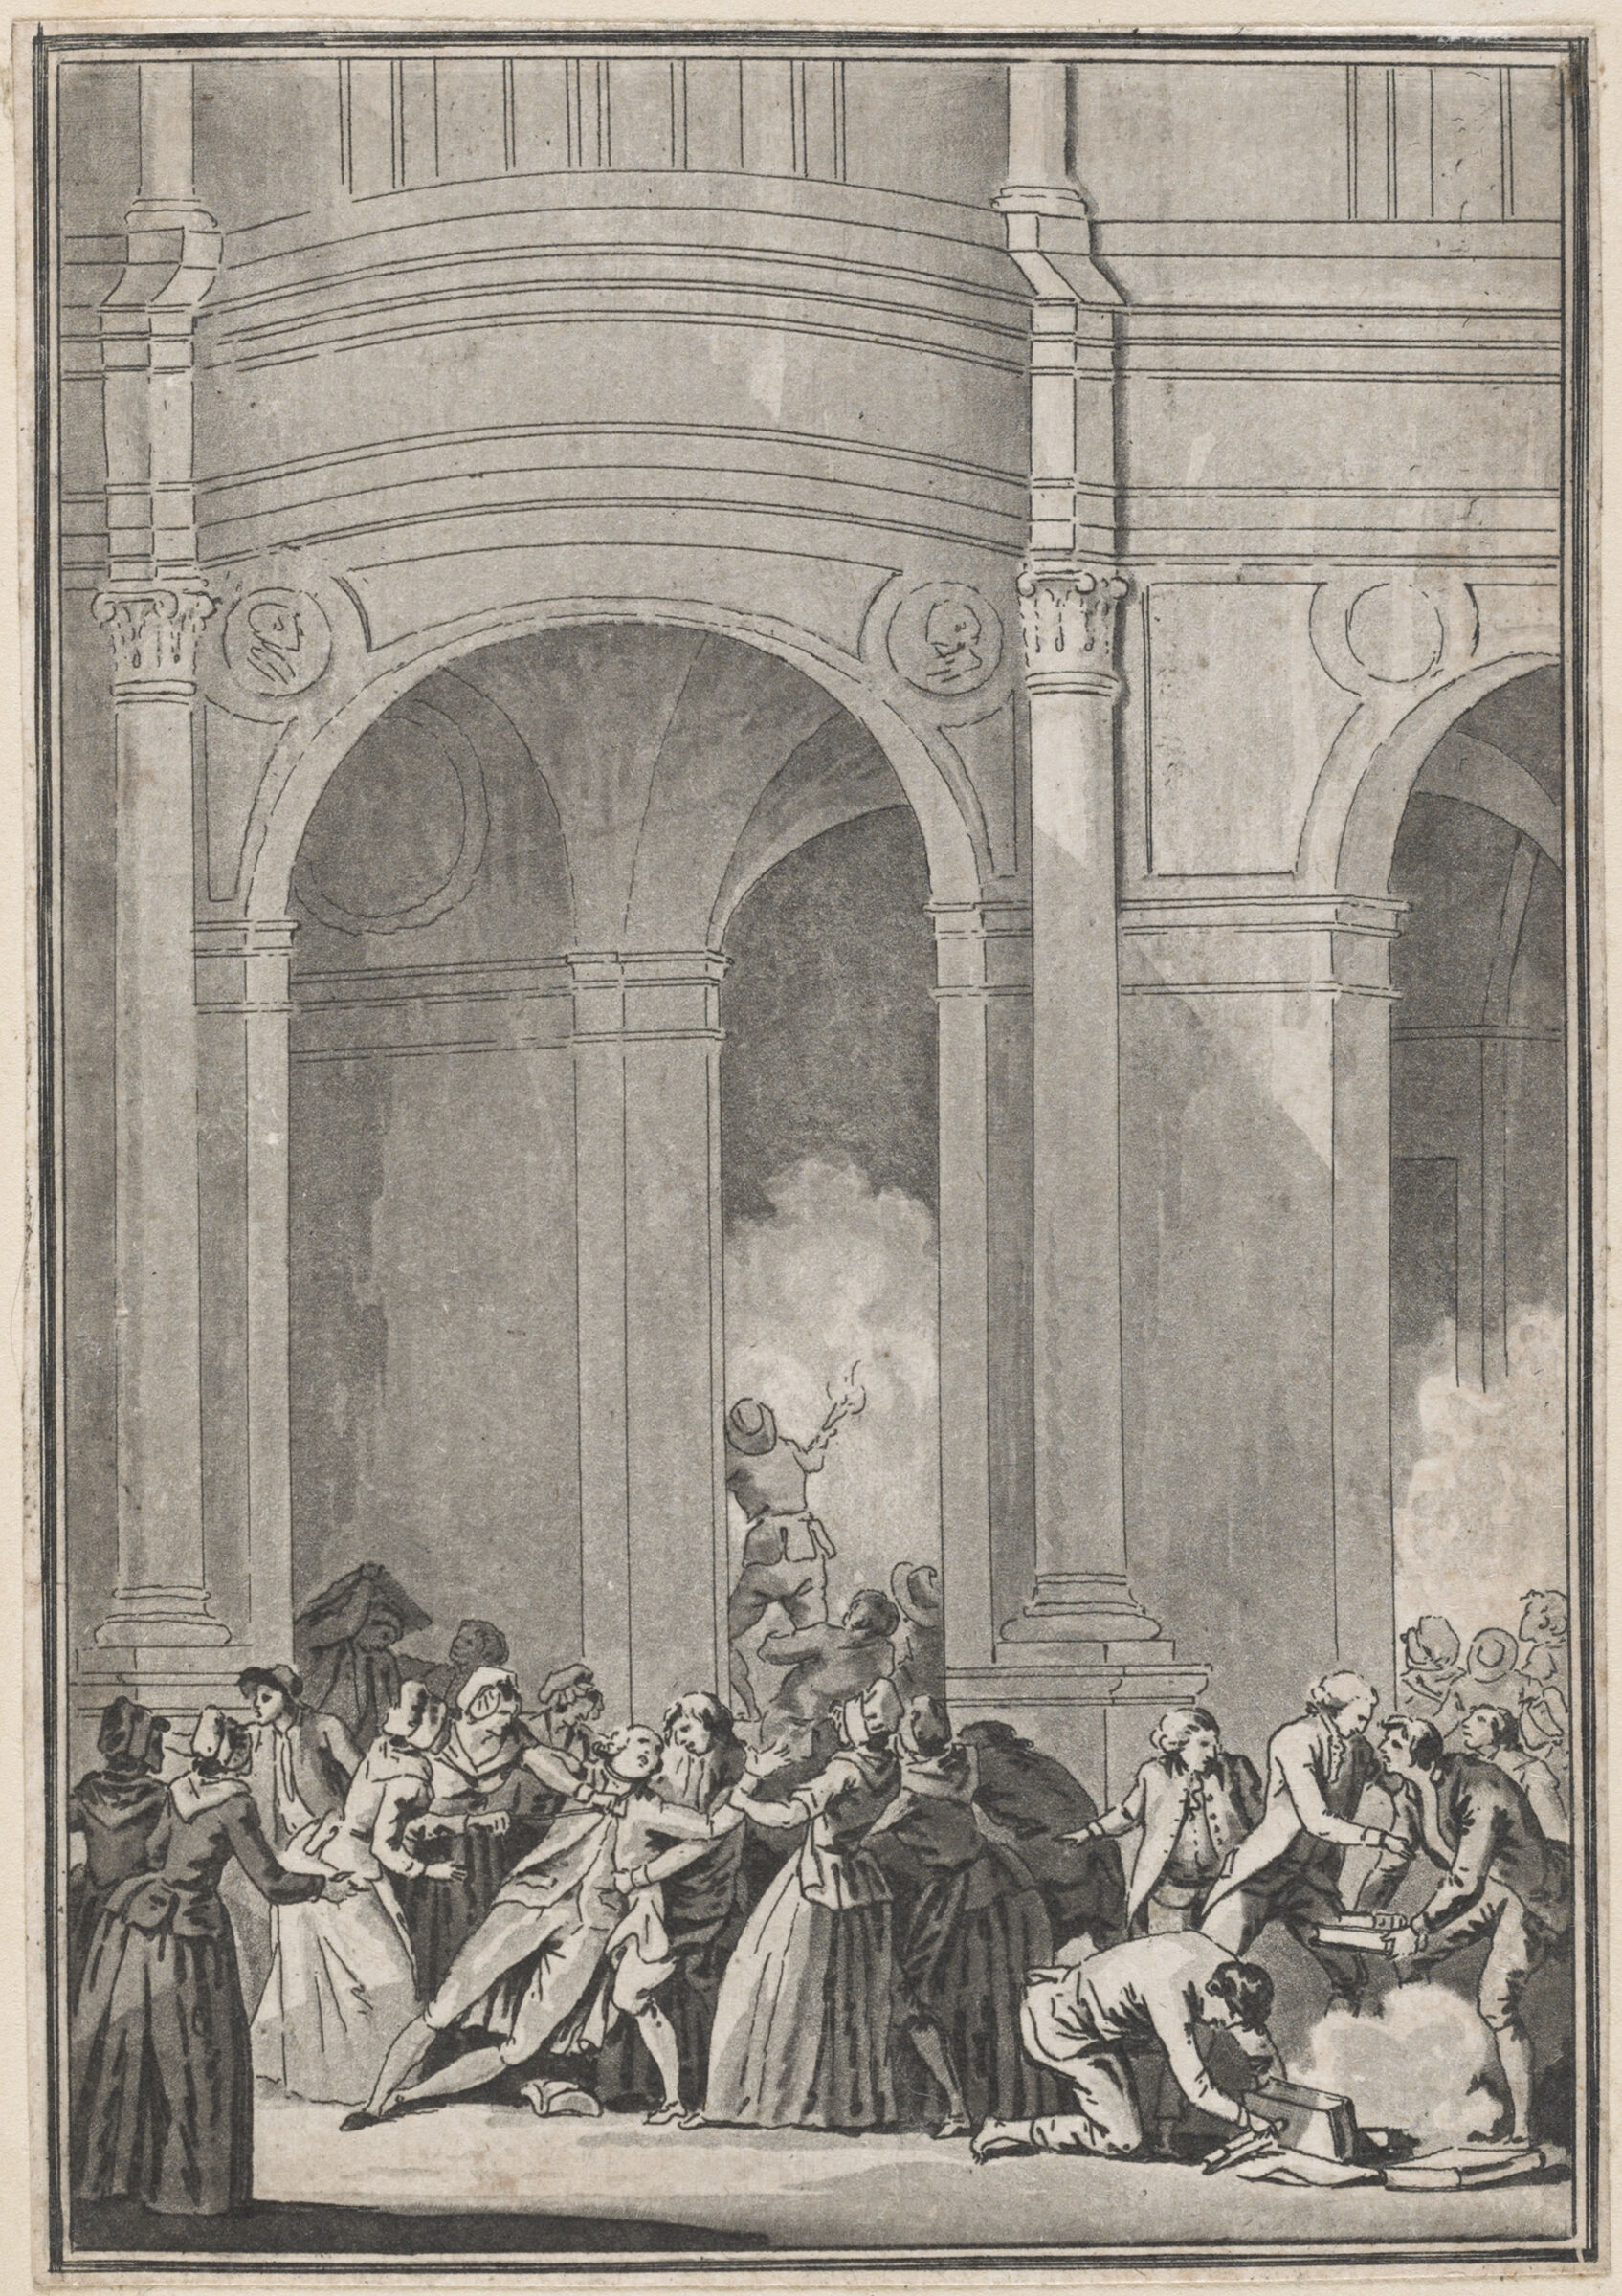 In The Couryard Of The Hôtel De Ville, The Women Try To Hang The Abbé Lefevre, And The Men Begin To Burn Papers (5 October 1789)